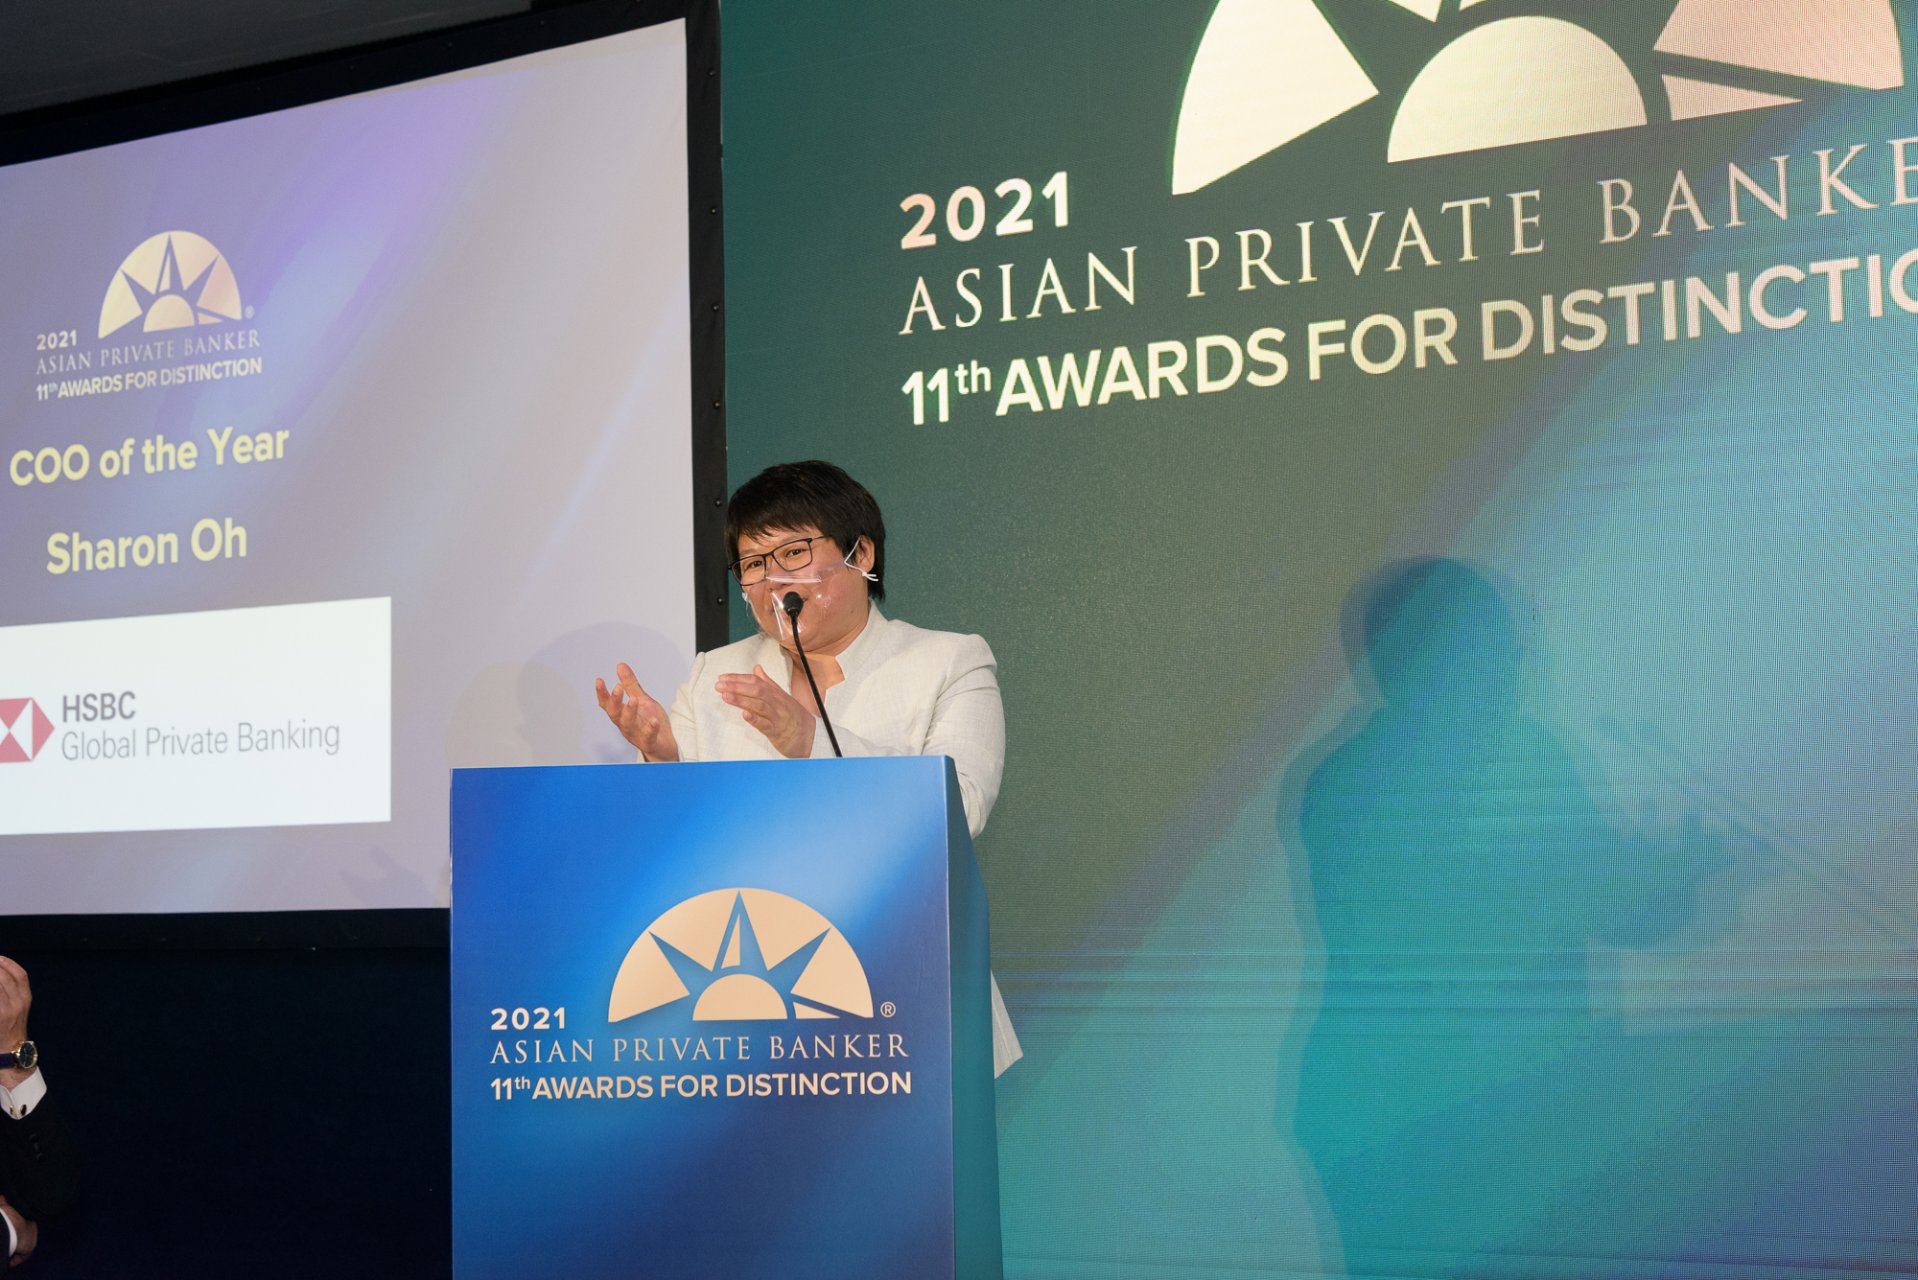 Sharon Oh of HSBC Global Private Banking delivering her speech for COO of the Year